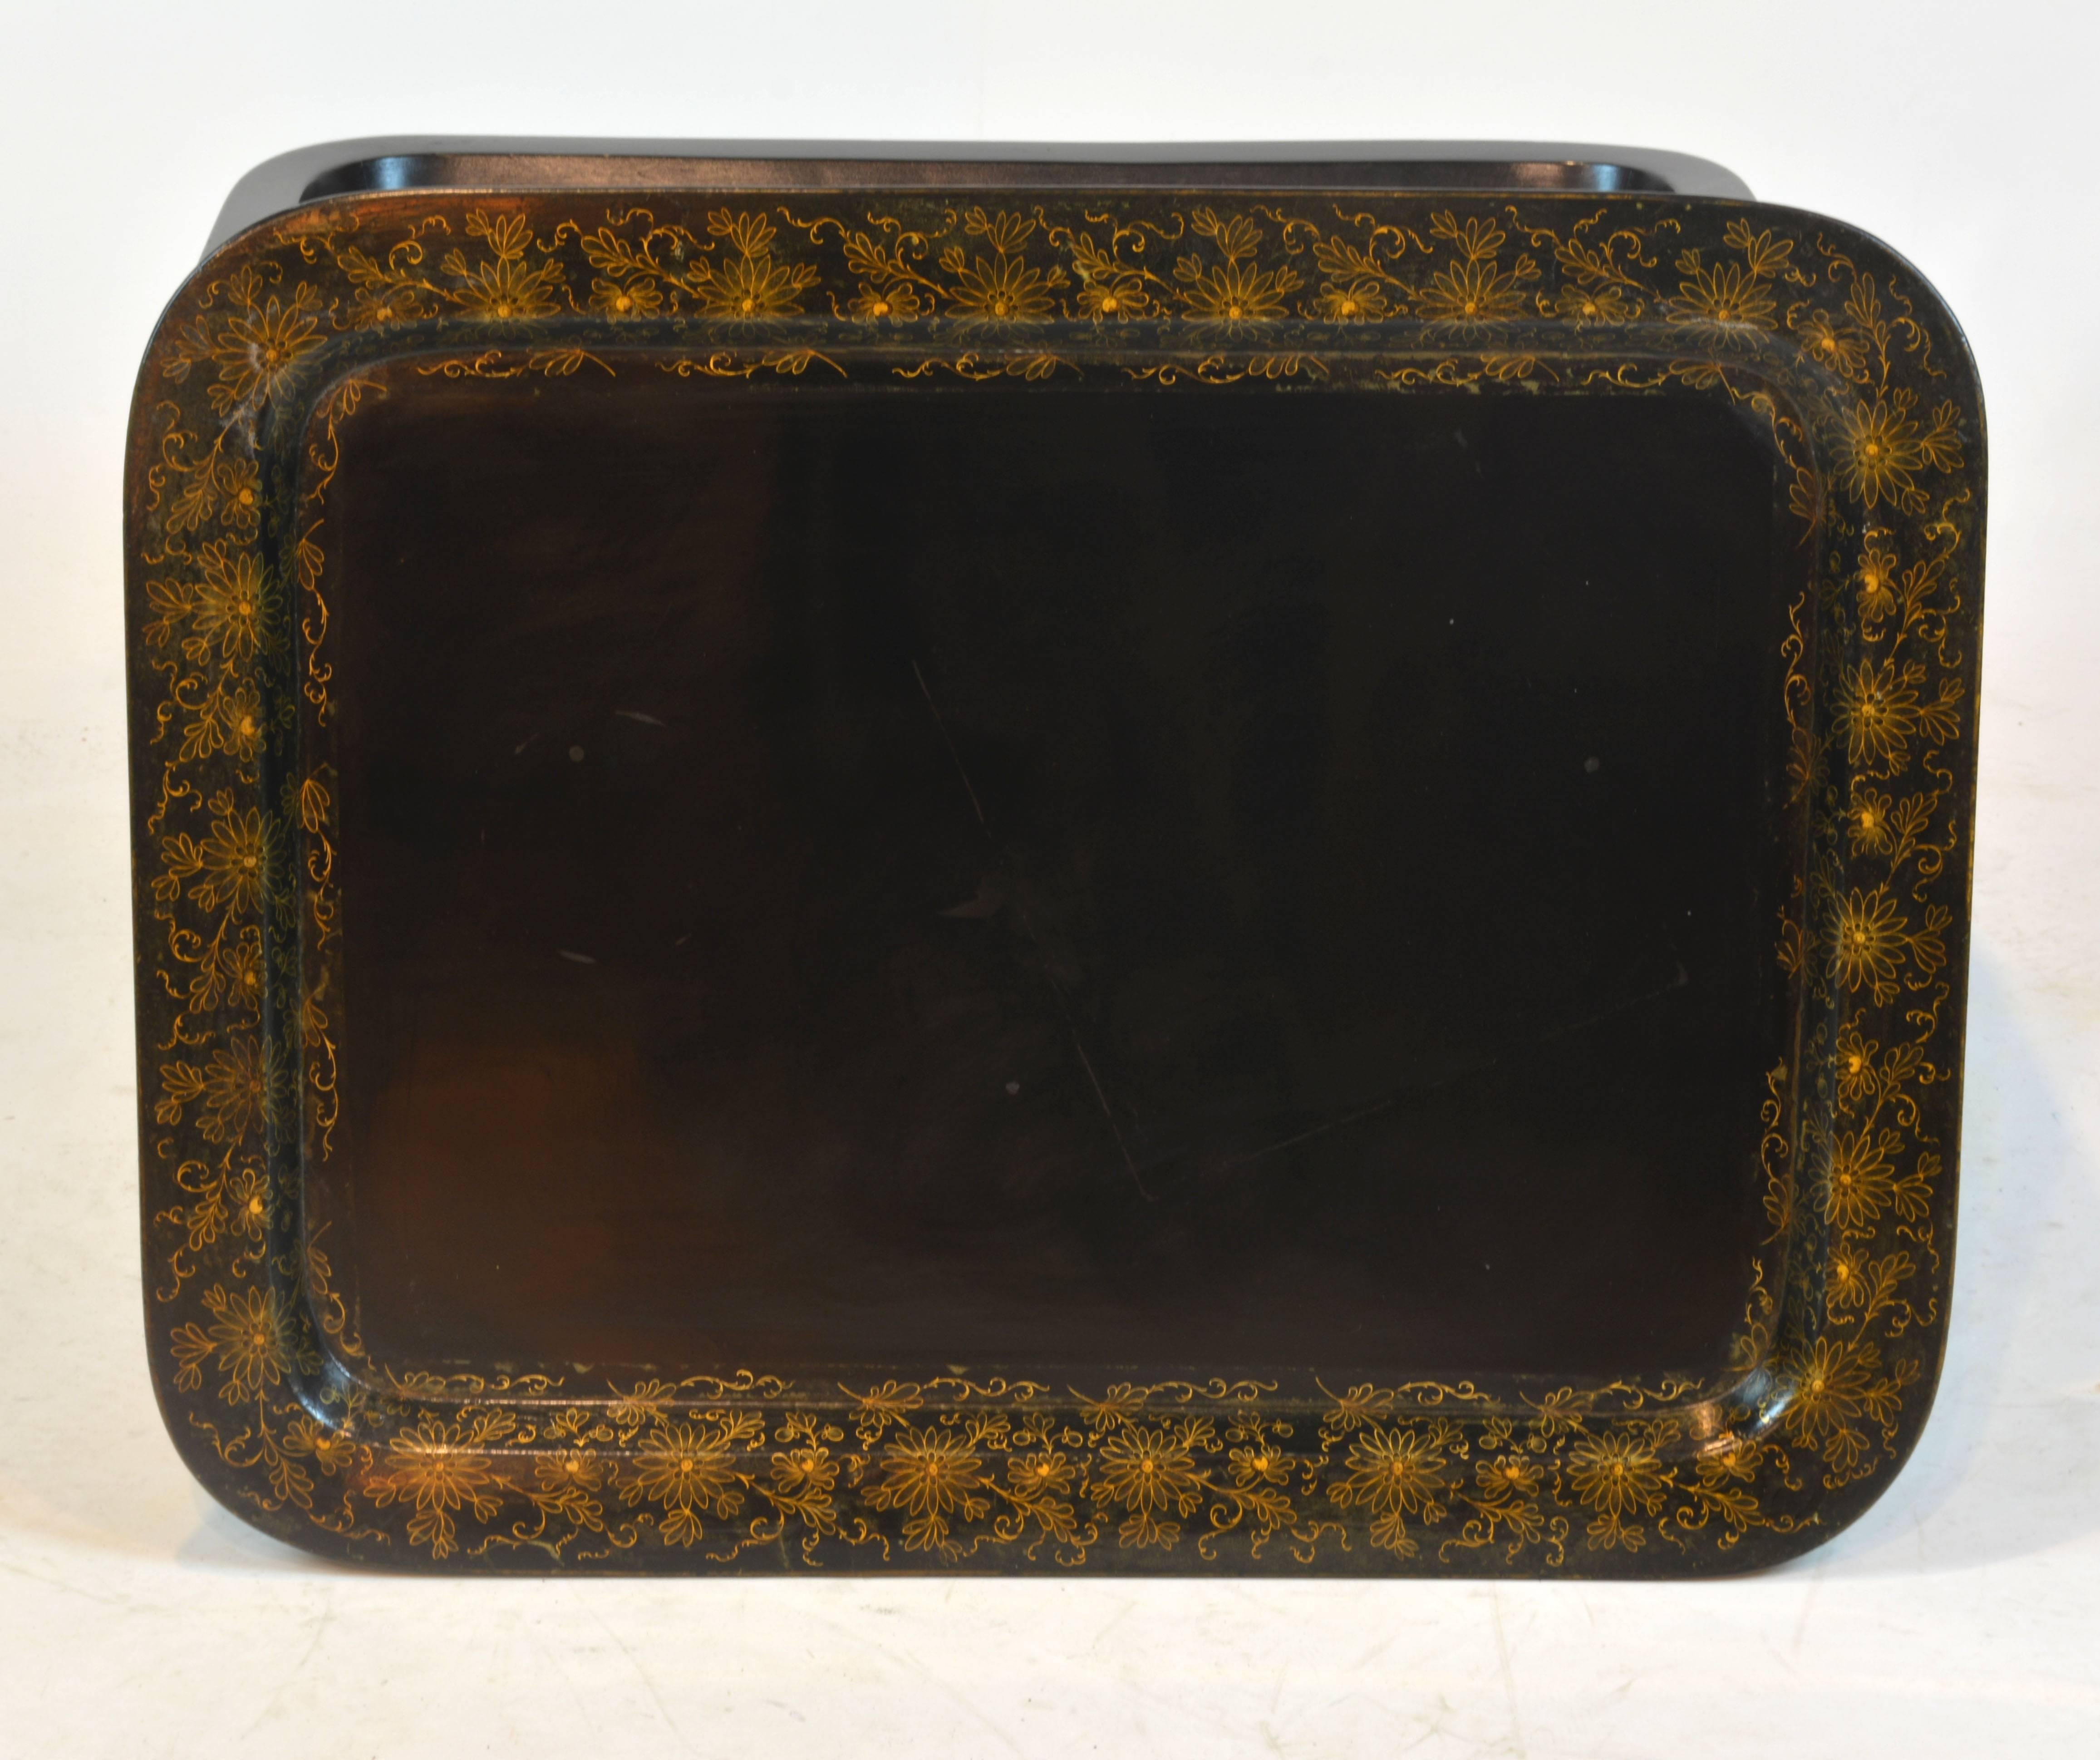 20th Century Expandable English Regency Style Faux Bamboo Black Lacquer and Gilt Tray Table